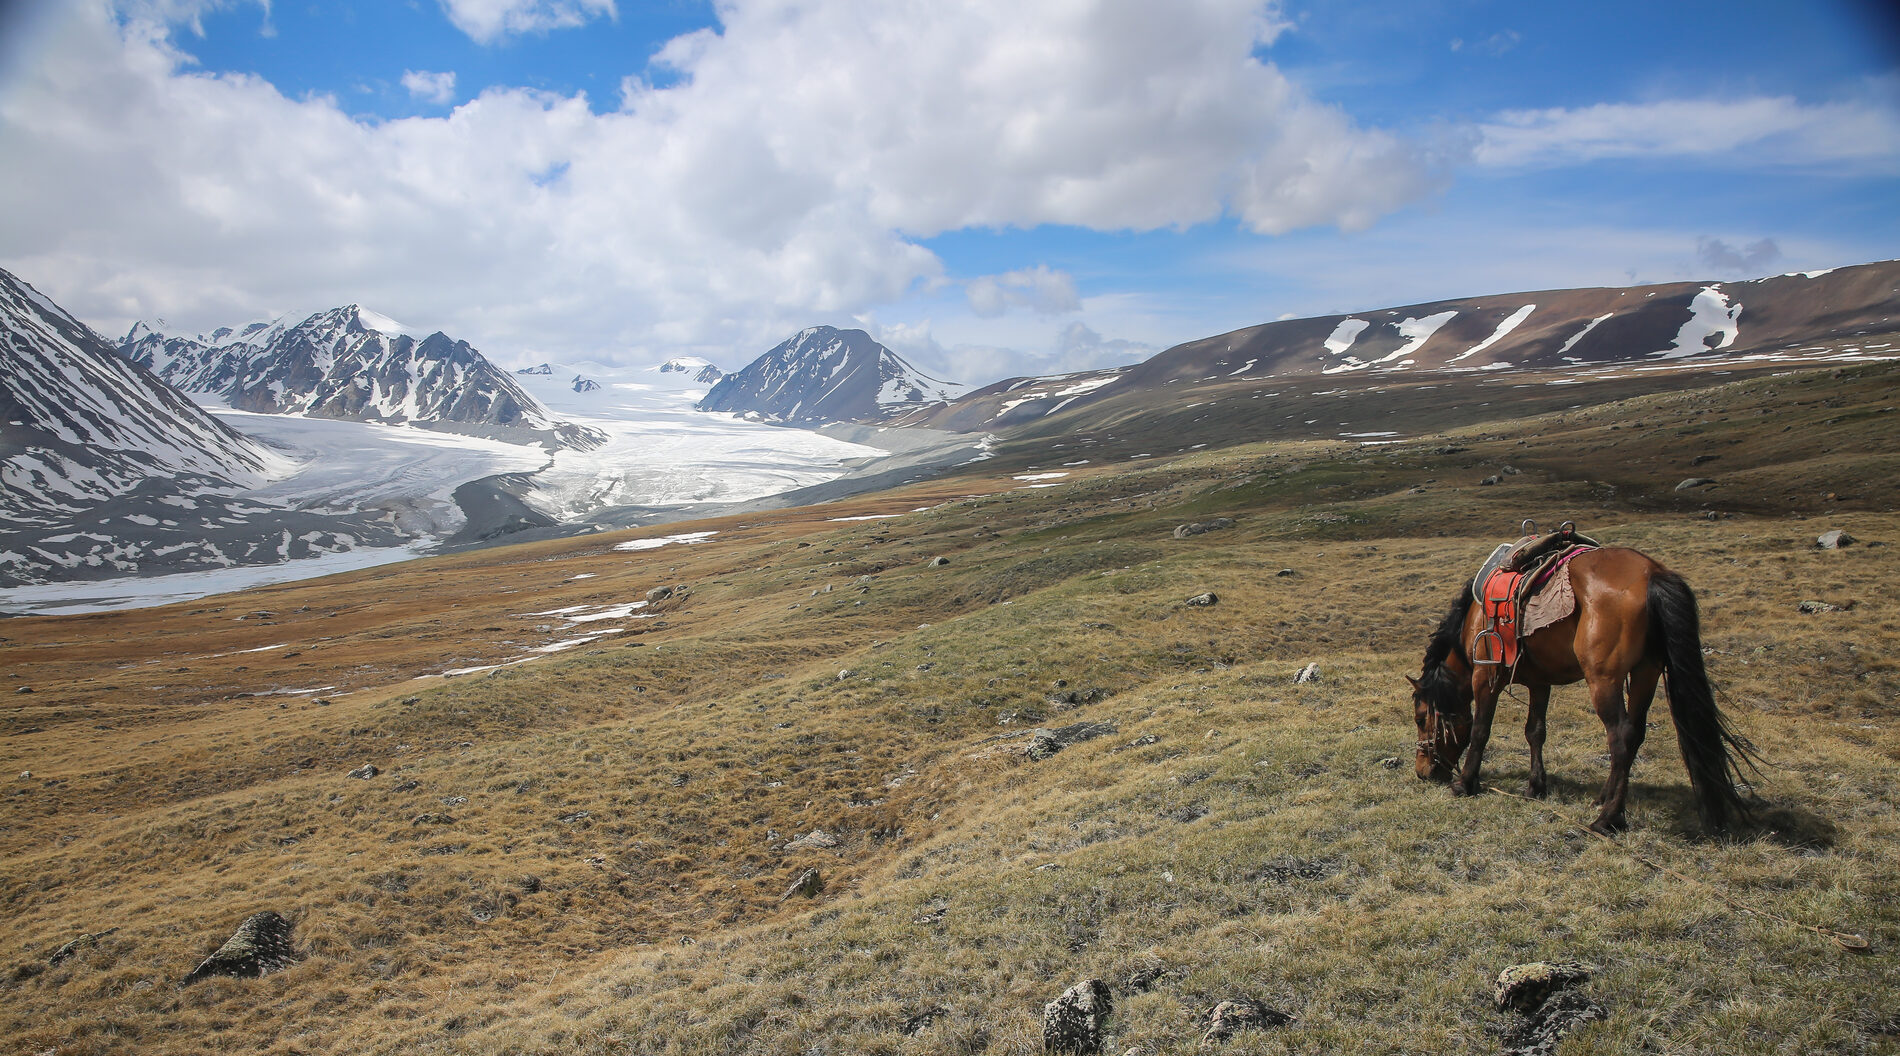 A horse with a saddle grazing in a grassy field infront of a snowy, mountainous landscape.